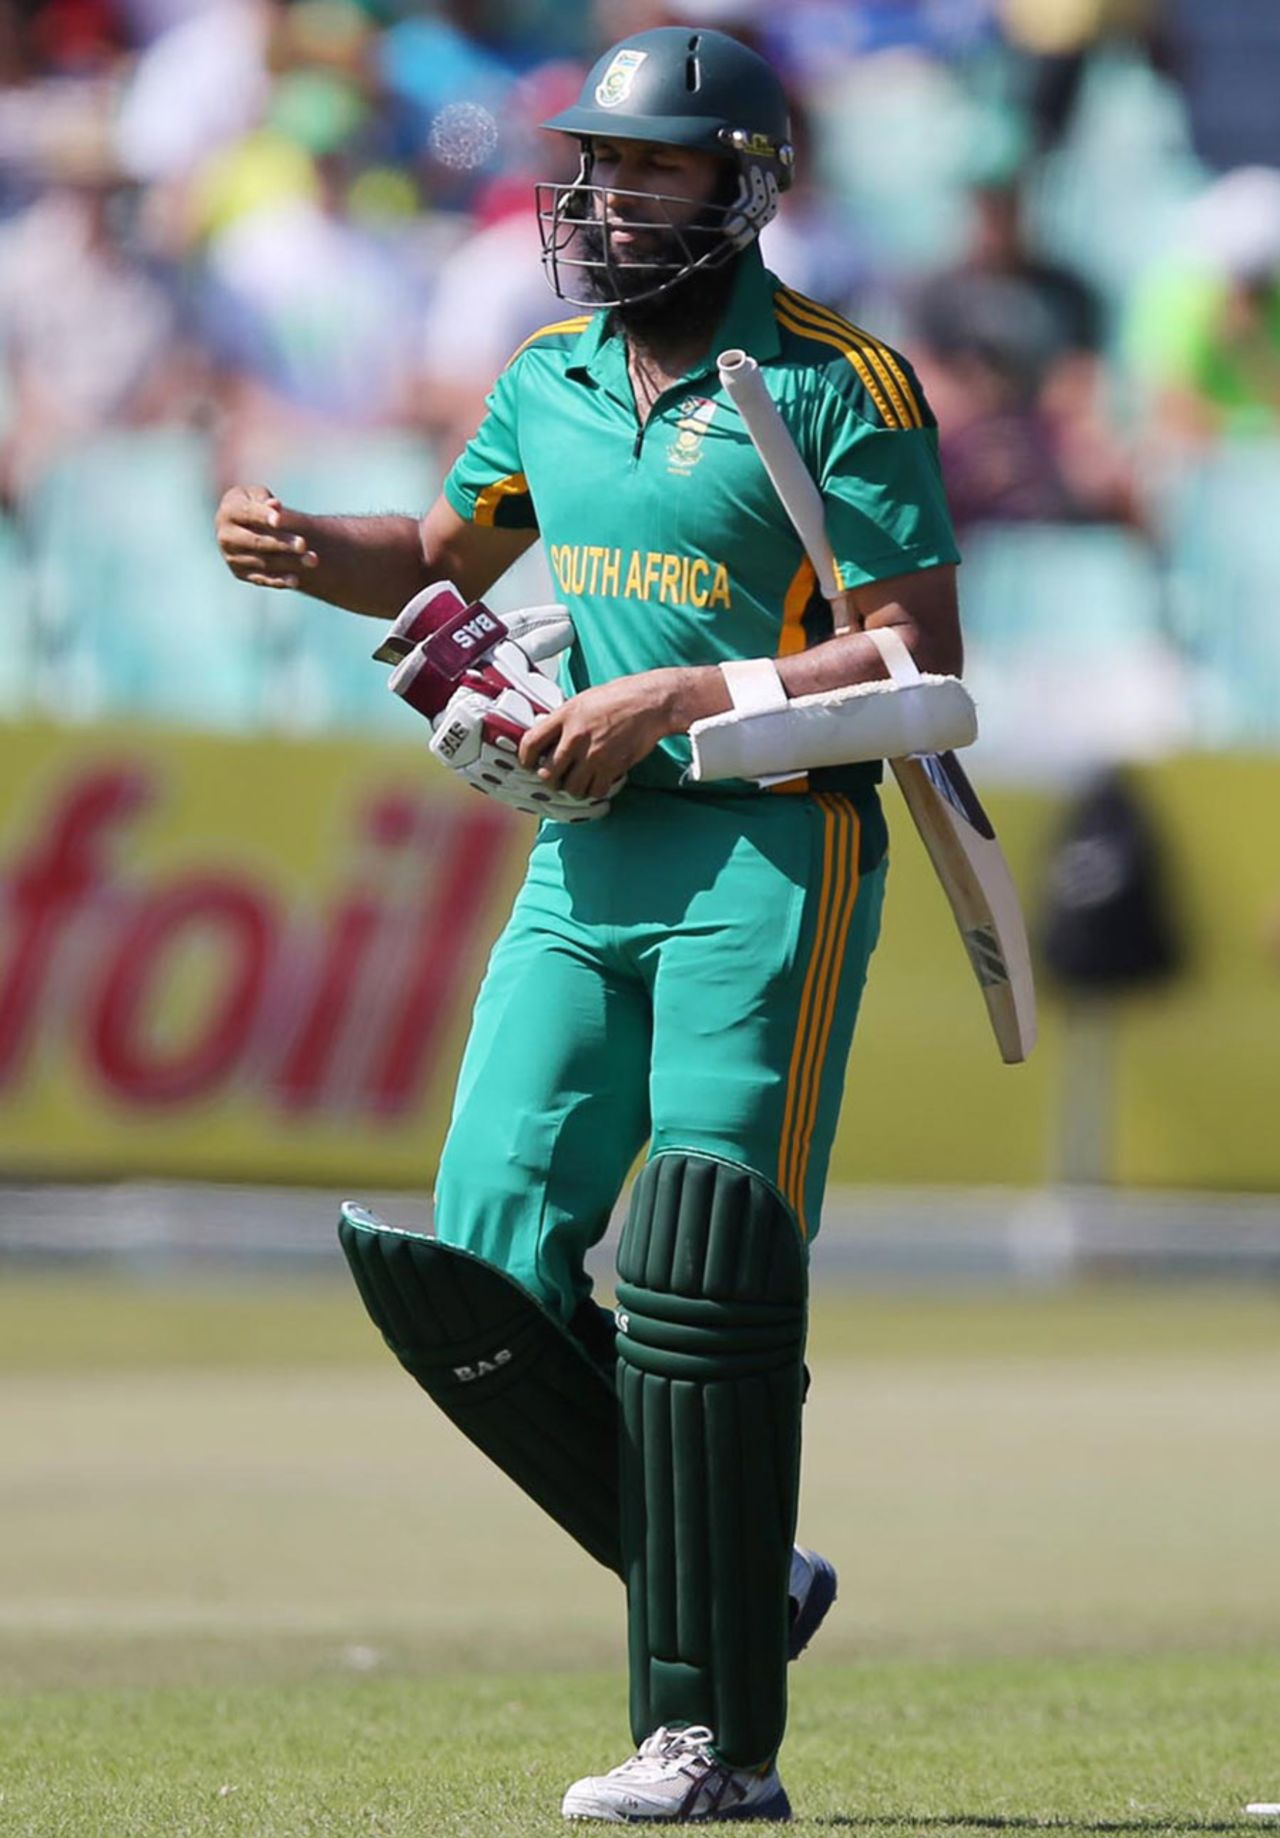 Hashim Amla walks off after being dismissed off the first ball of the match, South Africa v Pakistan, 4th ODI, Durban, March 21, 2013